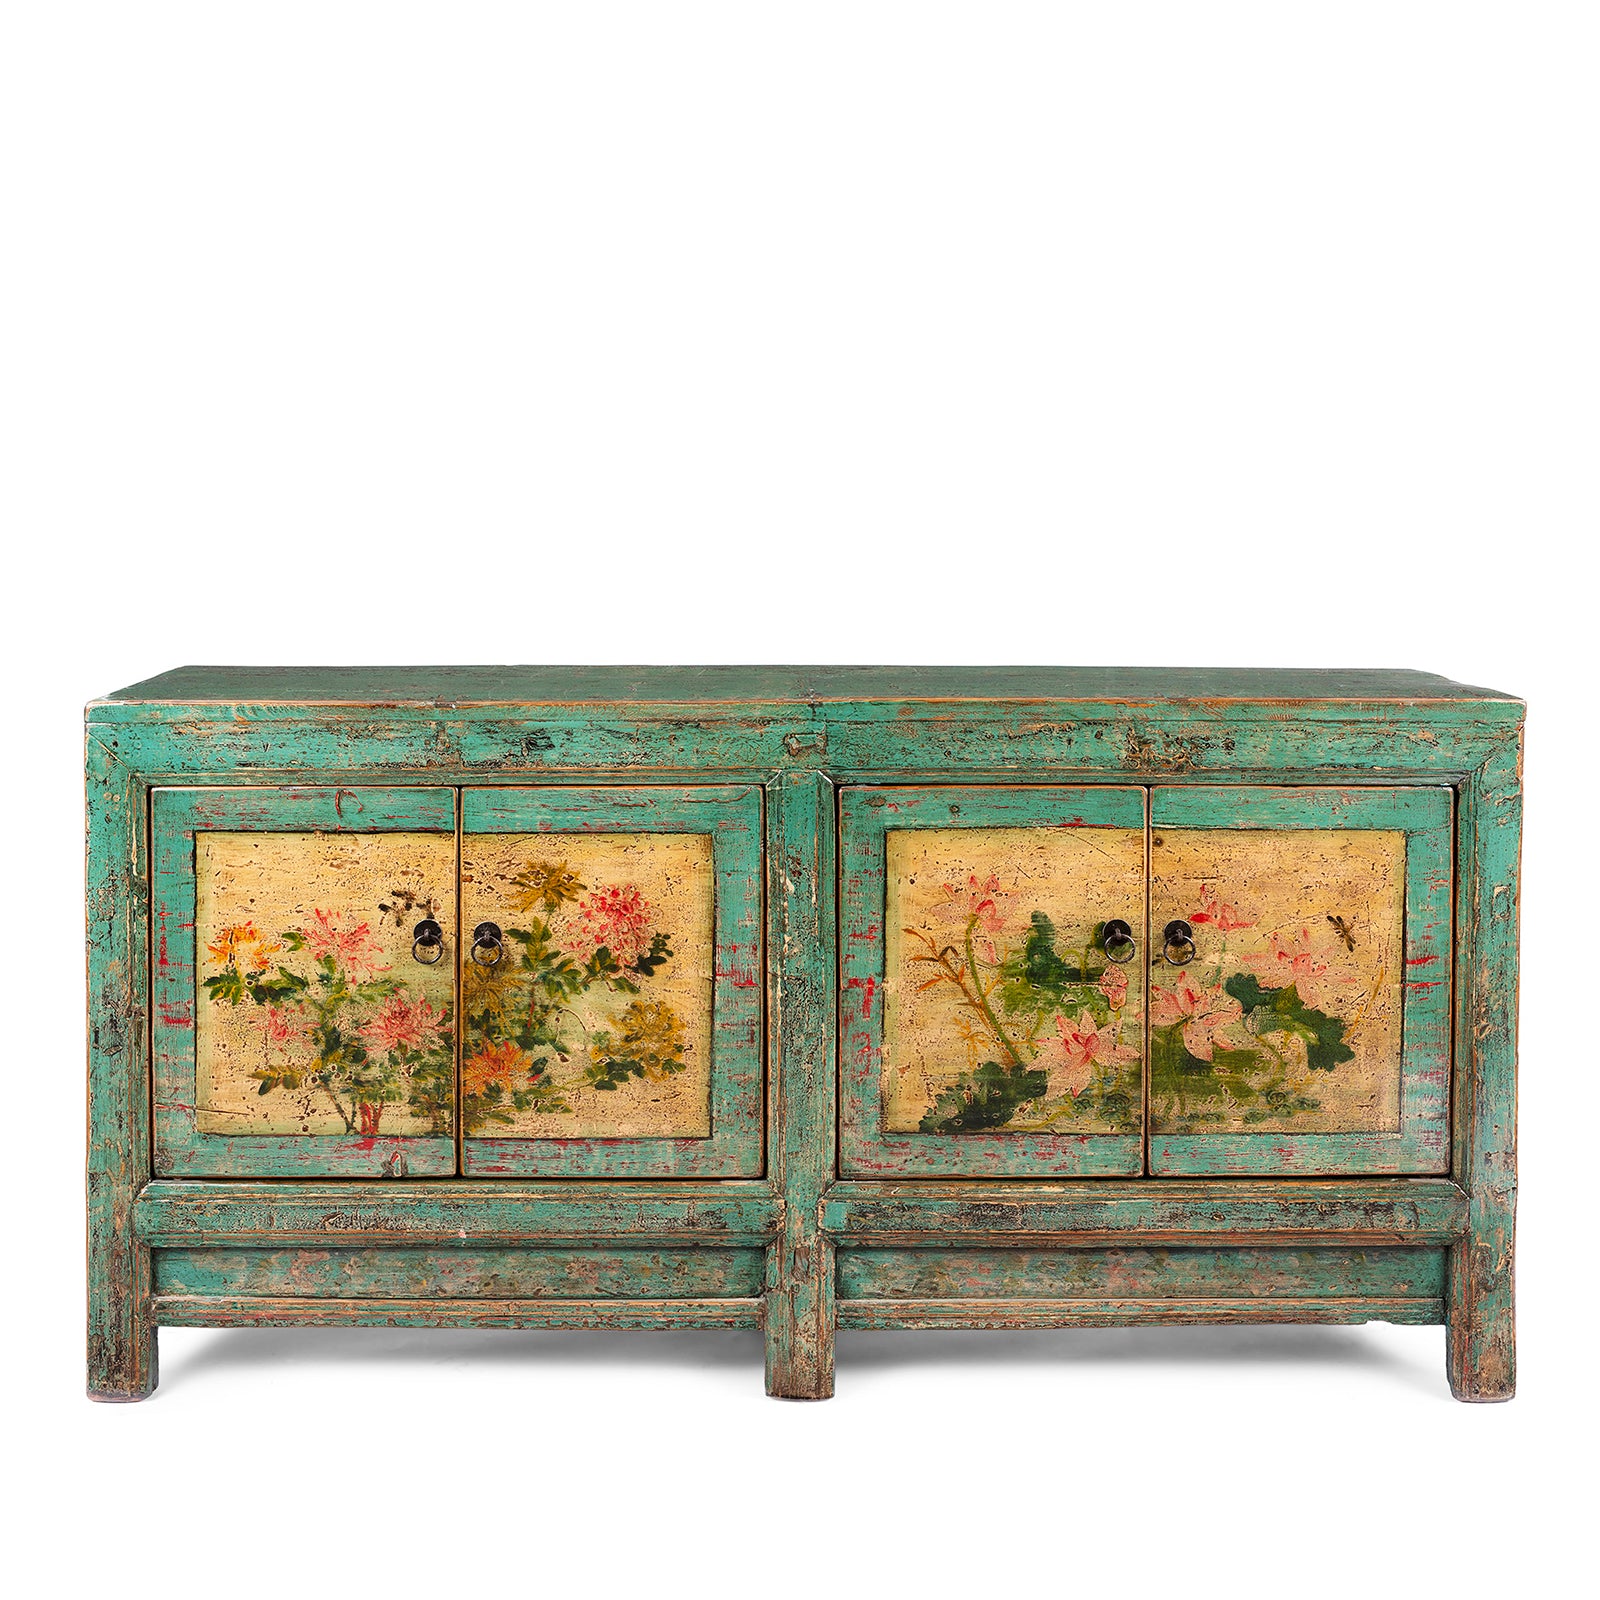 Vintage Mint Painted Floral Sideboard From Shanxi | Indigo Antiques